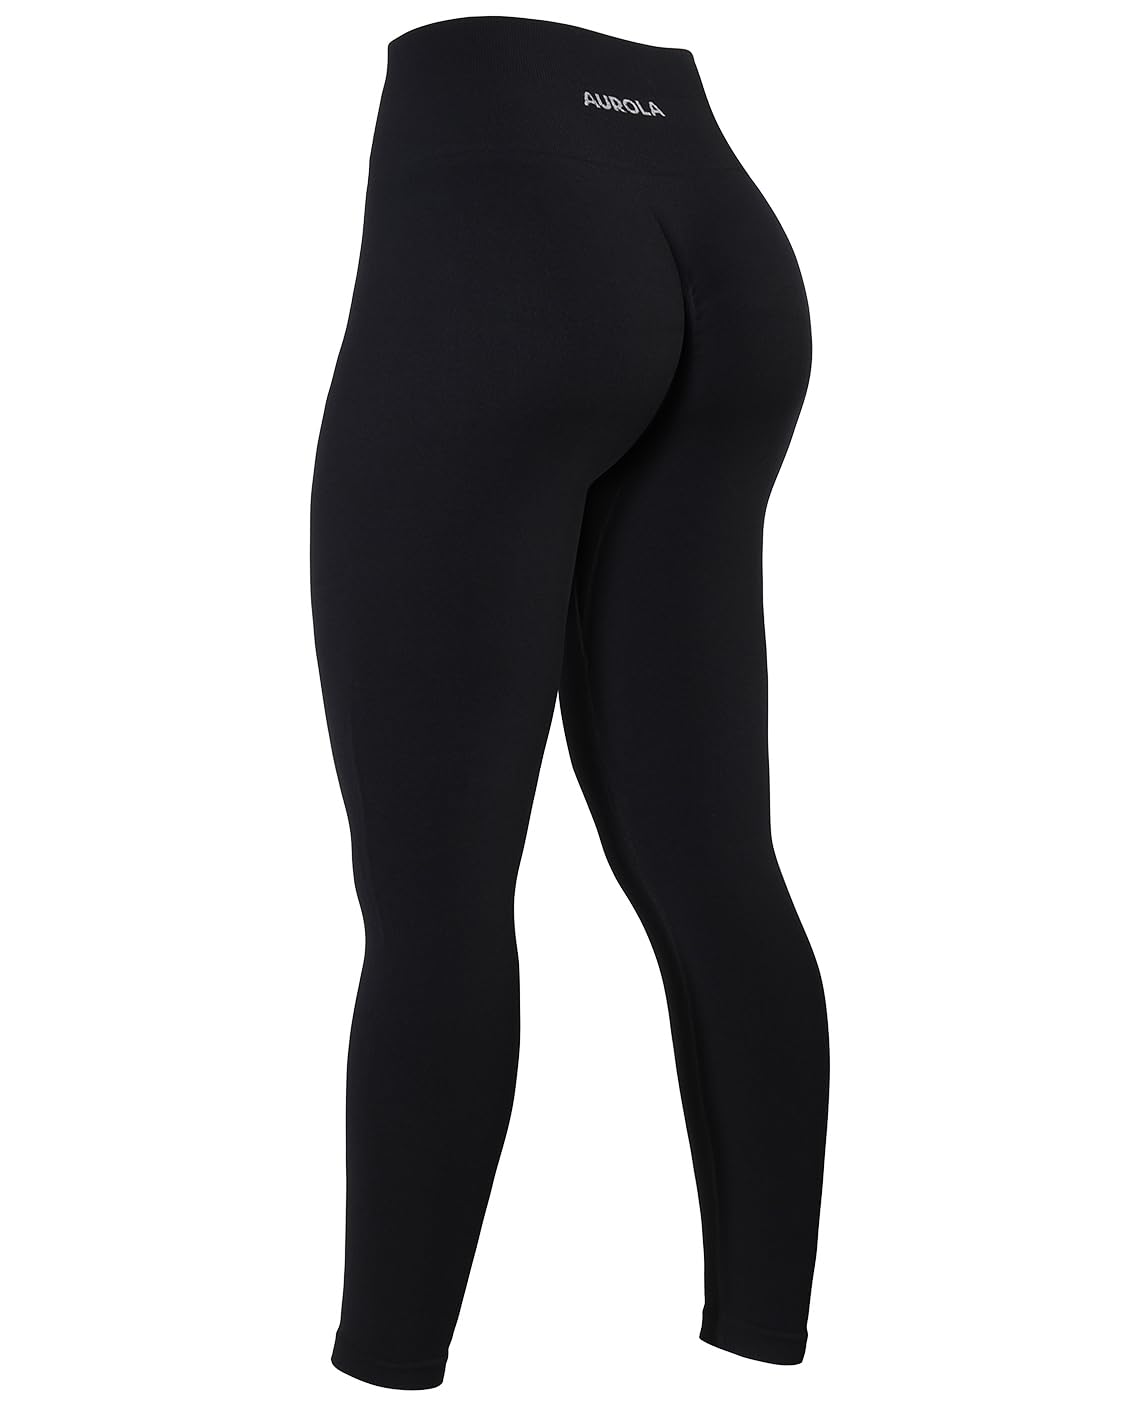 Buy AUROLA Power Workout Leggings for Women Tummy Control Squat Proof  Ribbed Thick Seamless Scrunch Active Pants